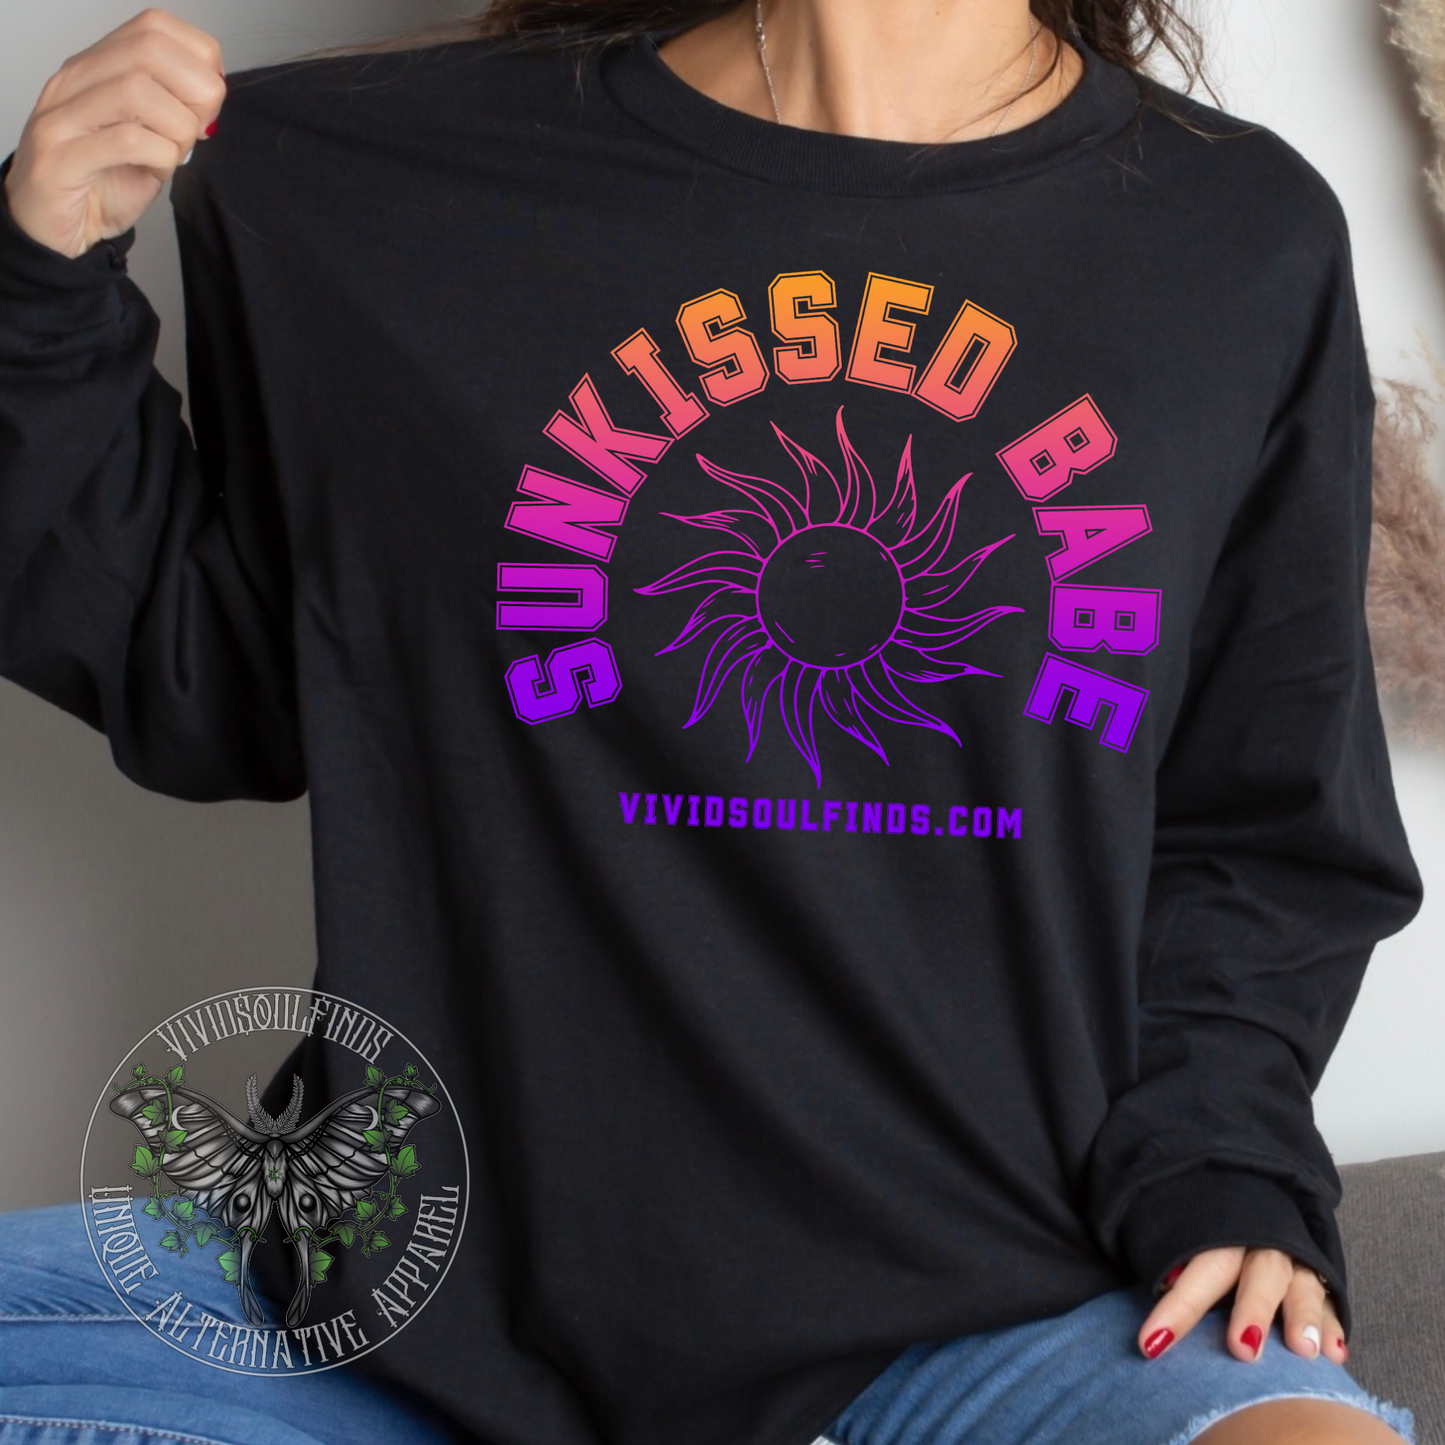 Sunkissed Babe VSF EXCLUSIVE